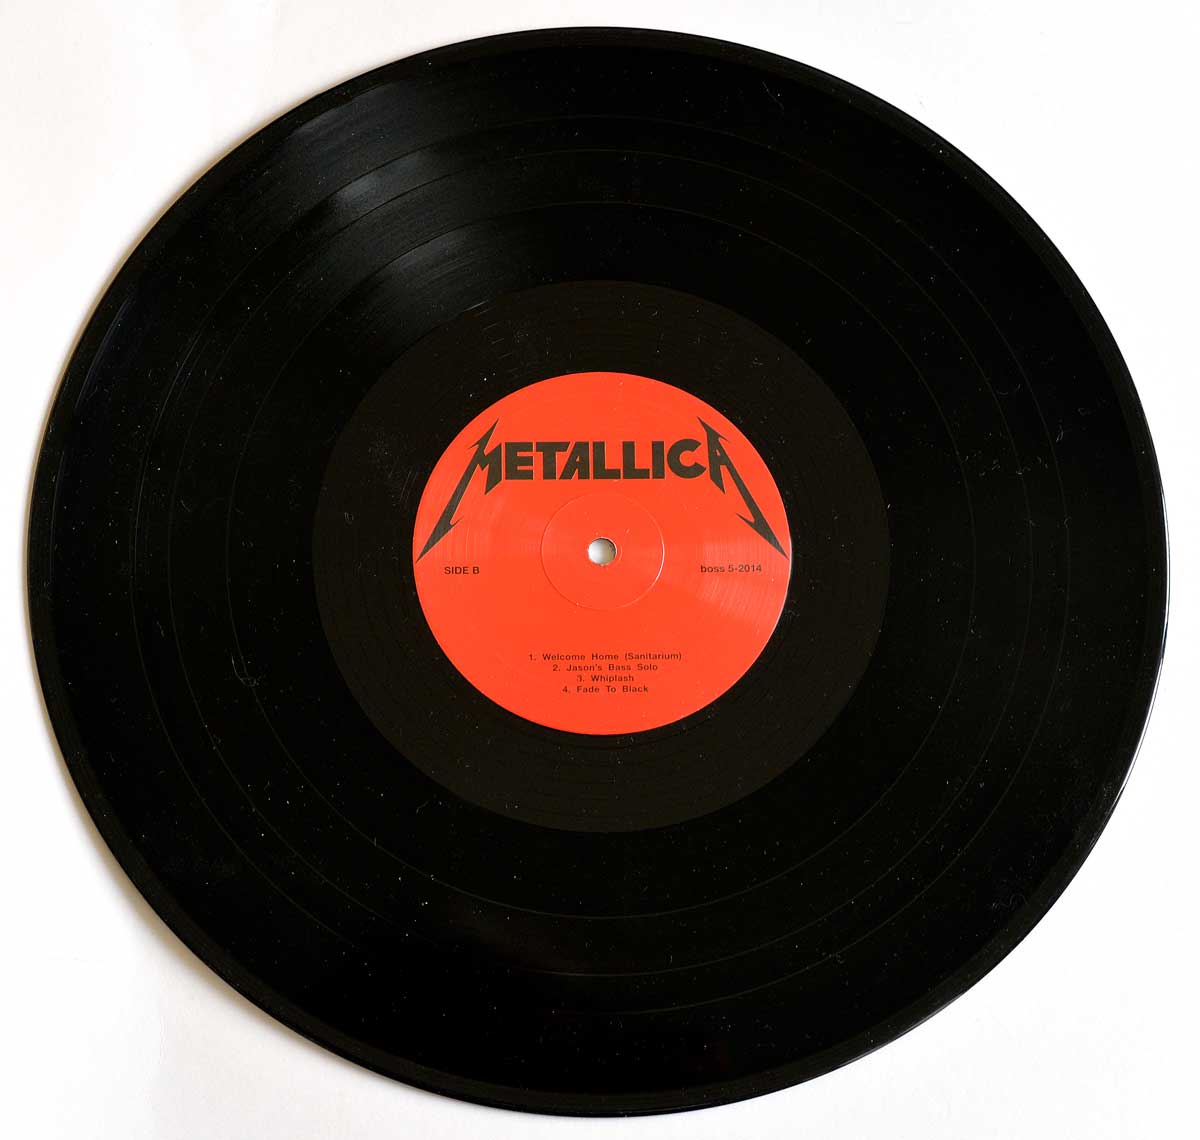 Photo of record 1   of METALLICA - Live at the Playhouse Theatre Winnipeg 1986 